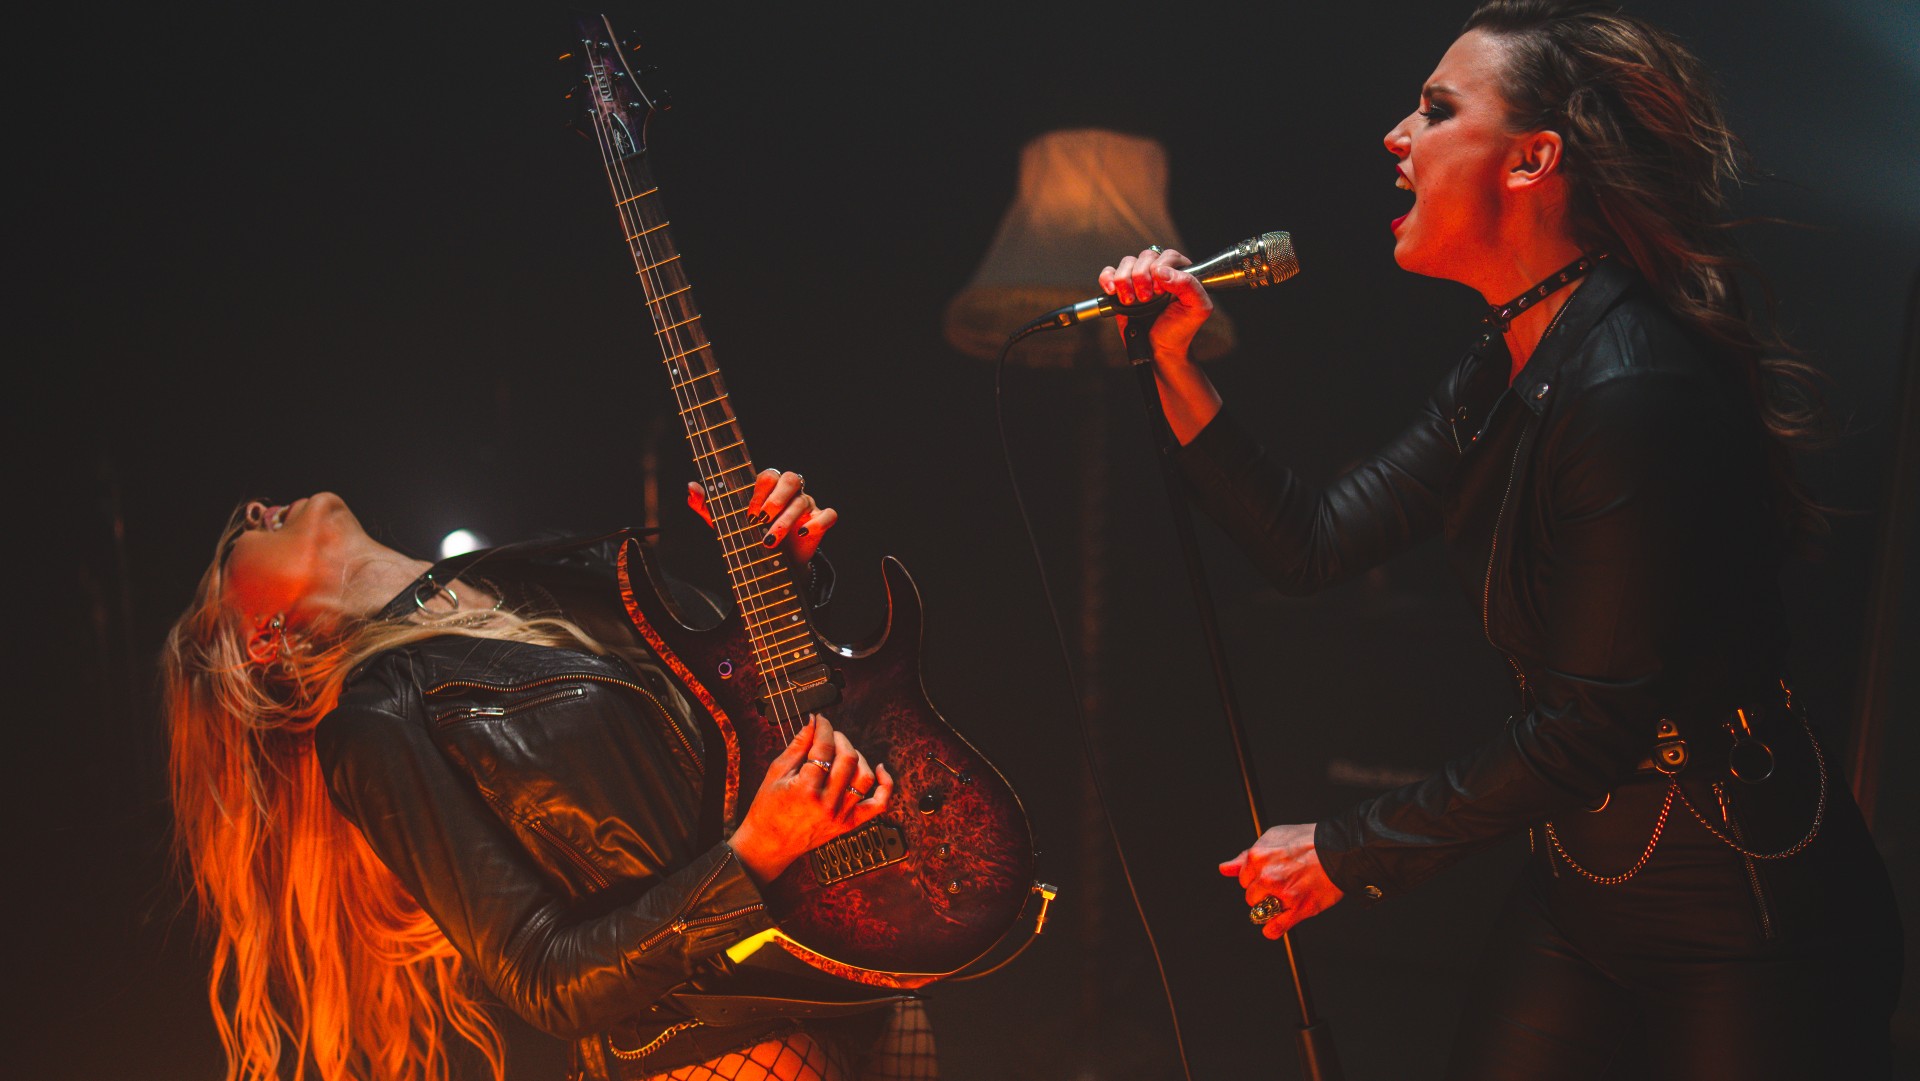 Sophie Lloyd and Lzzy Hale, photo by Nathersonn